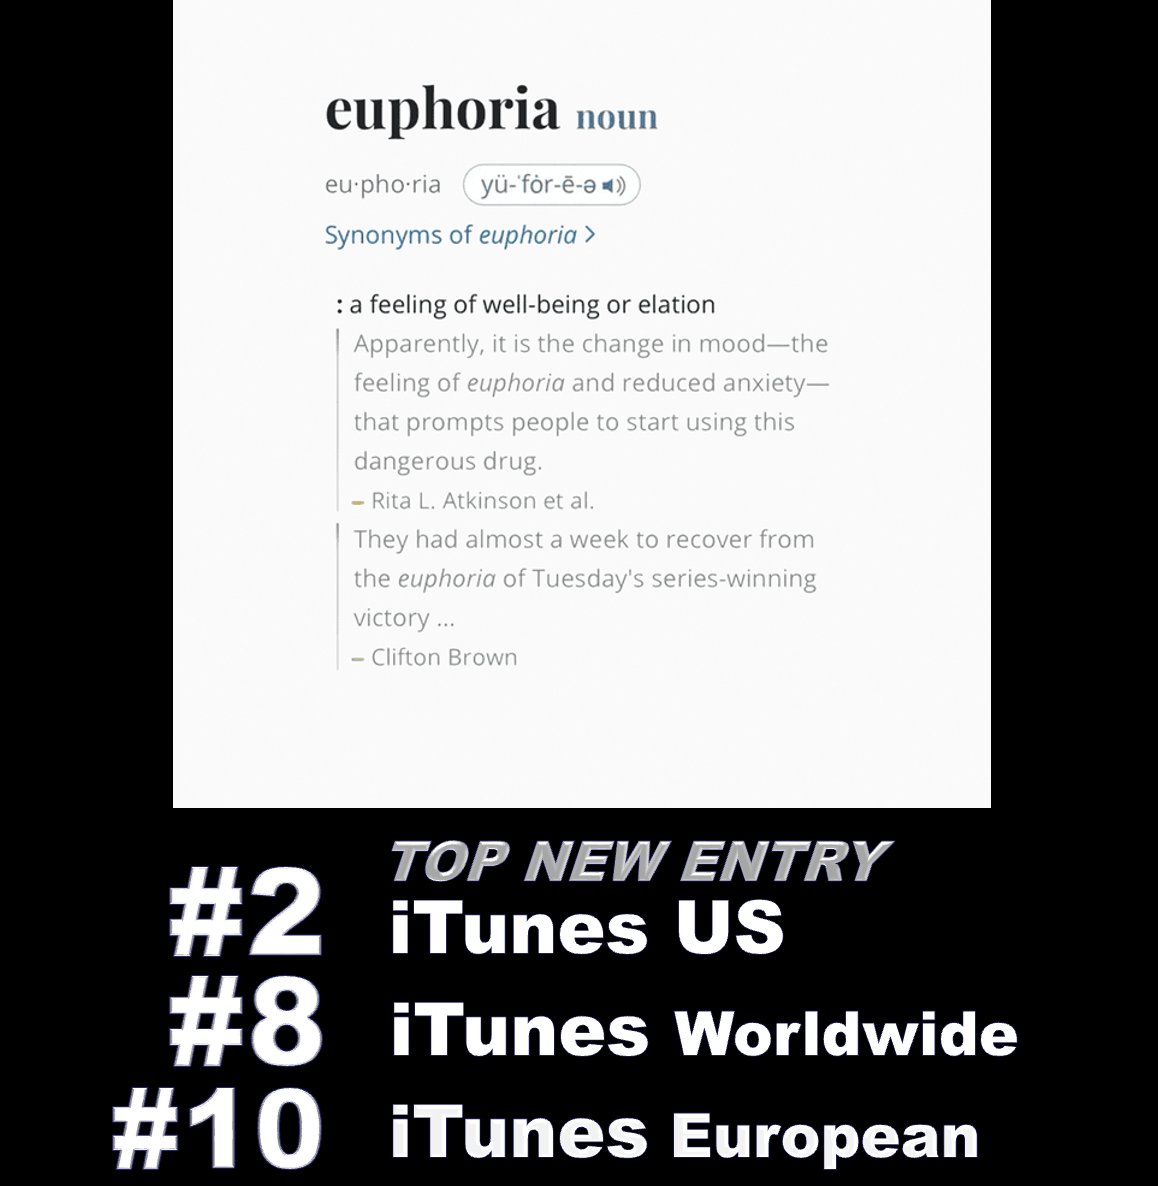 #KendrickLamar's 'Euphoria' has reached #1 on US Apple Music and scores the Highest New Entry on both the Worldwide & European iTunes Song charts, landing at #8 & #10 respectively and reaching #2 on US iTunes! 💪💥1⃣🇺🇸🍎🎼 ➕🔝🆕💥8⃣🌎🎵& 🔟🇪🇺🎵➕2⃣🇺🇸🎵🔥👑🖤